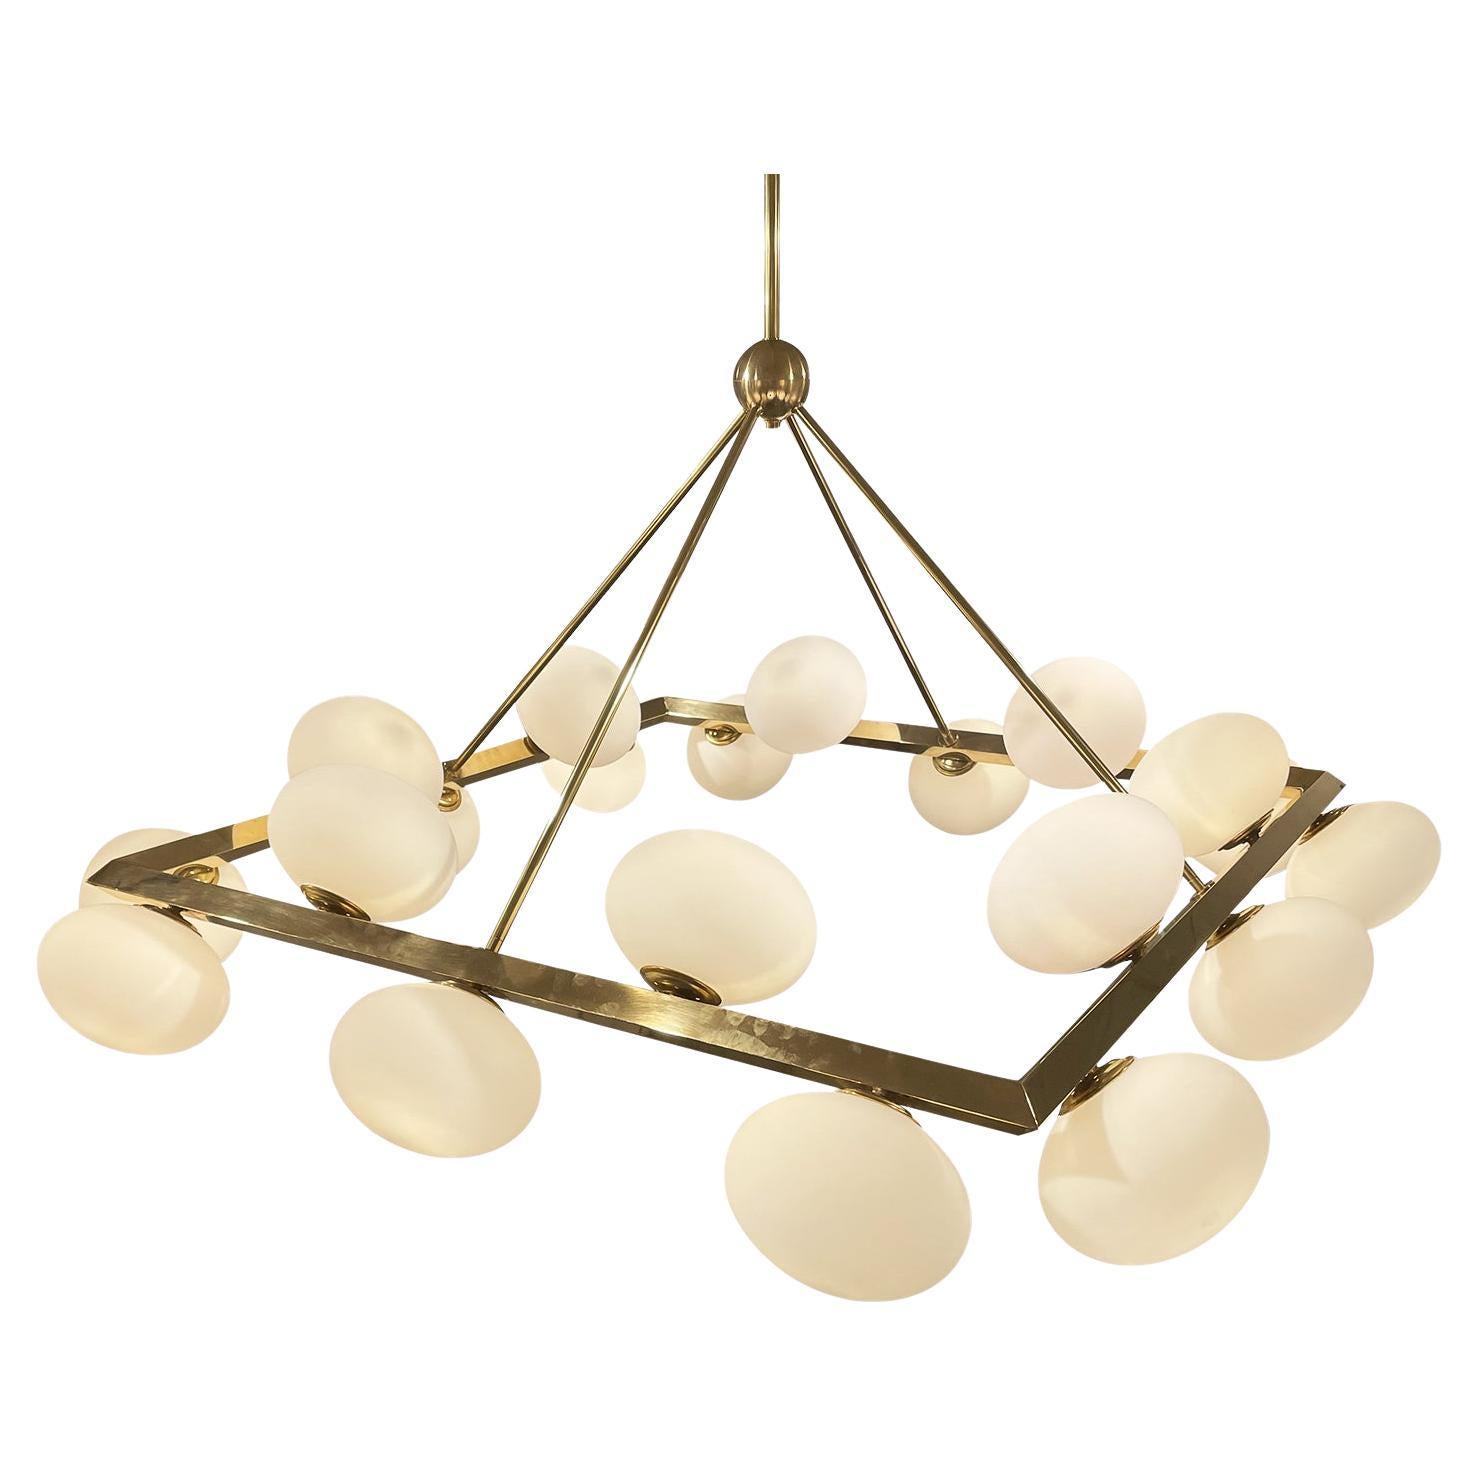 20th Century Italian Square Opaline Glass Chandelier in the Style of Stilnovo For Sale